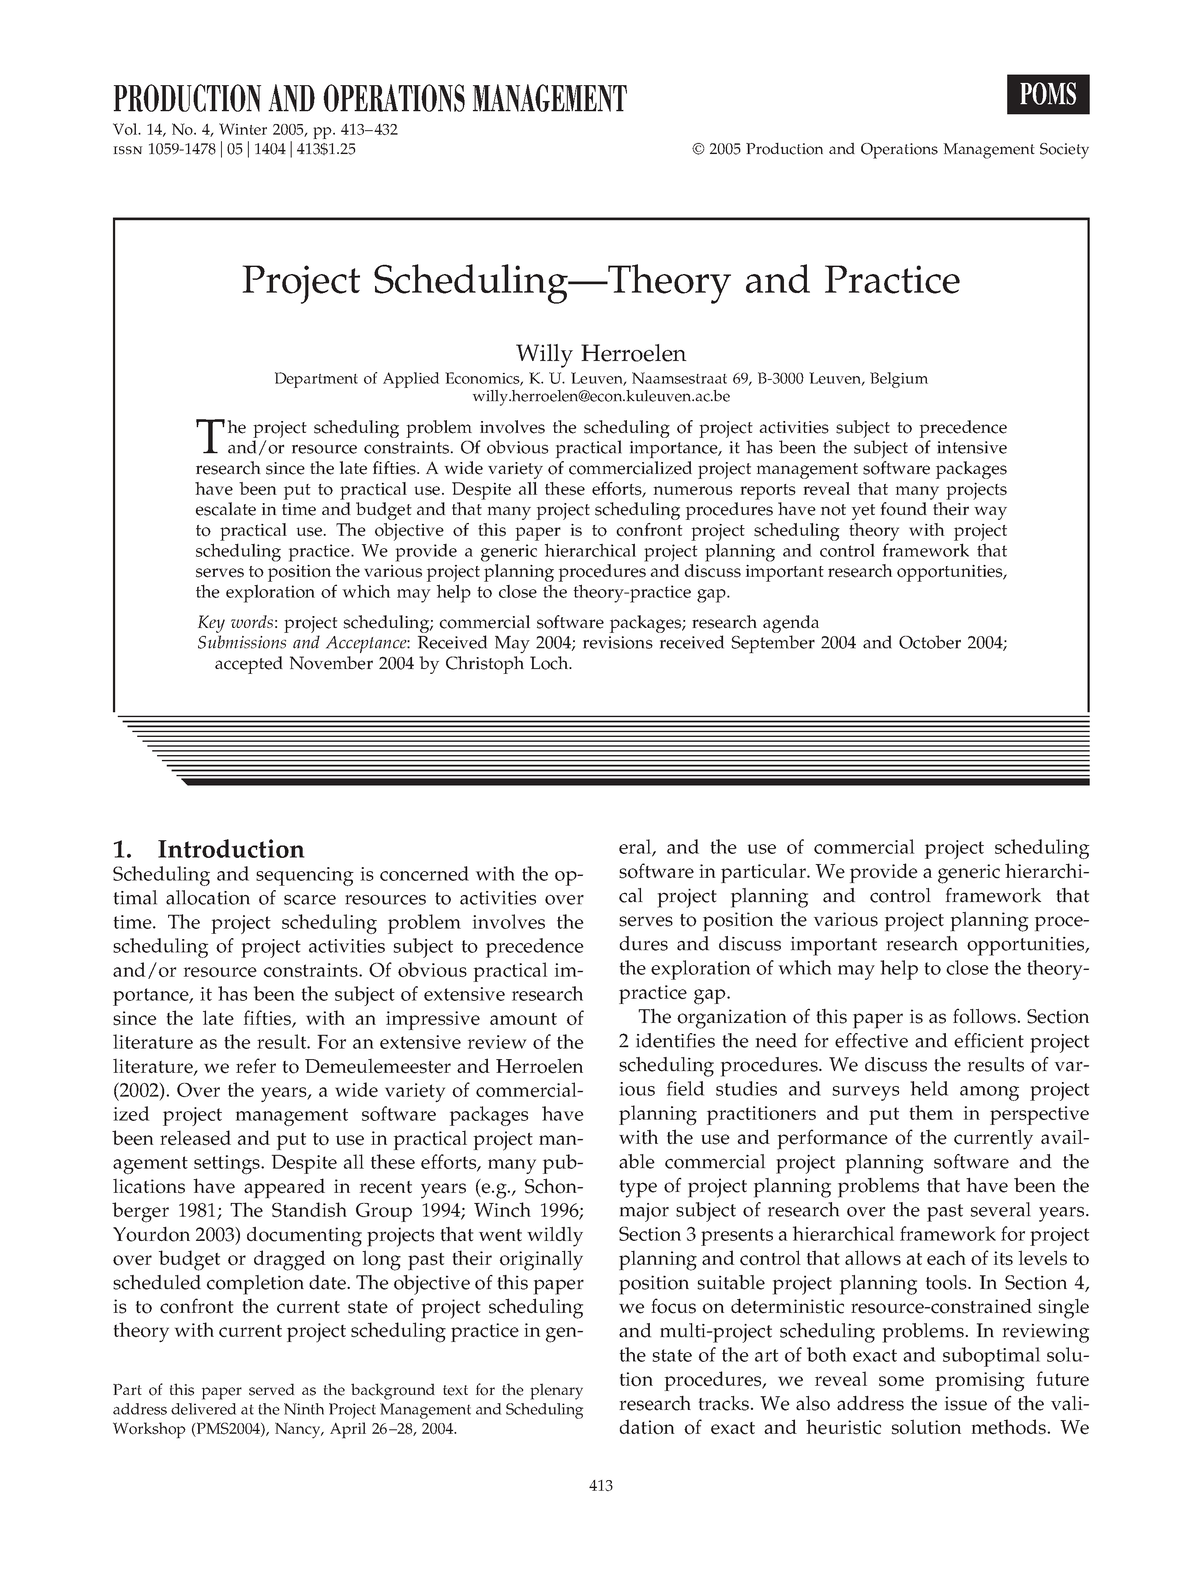 literature review on project scheduling